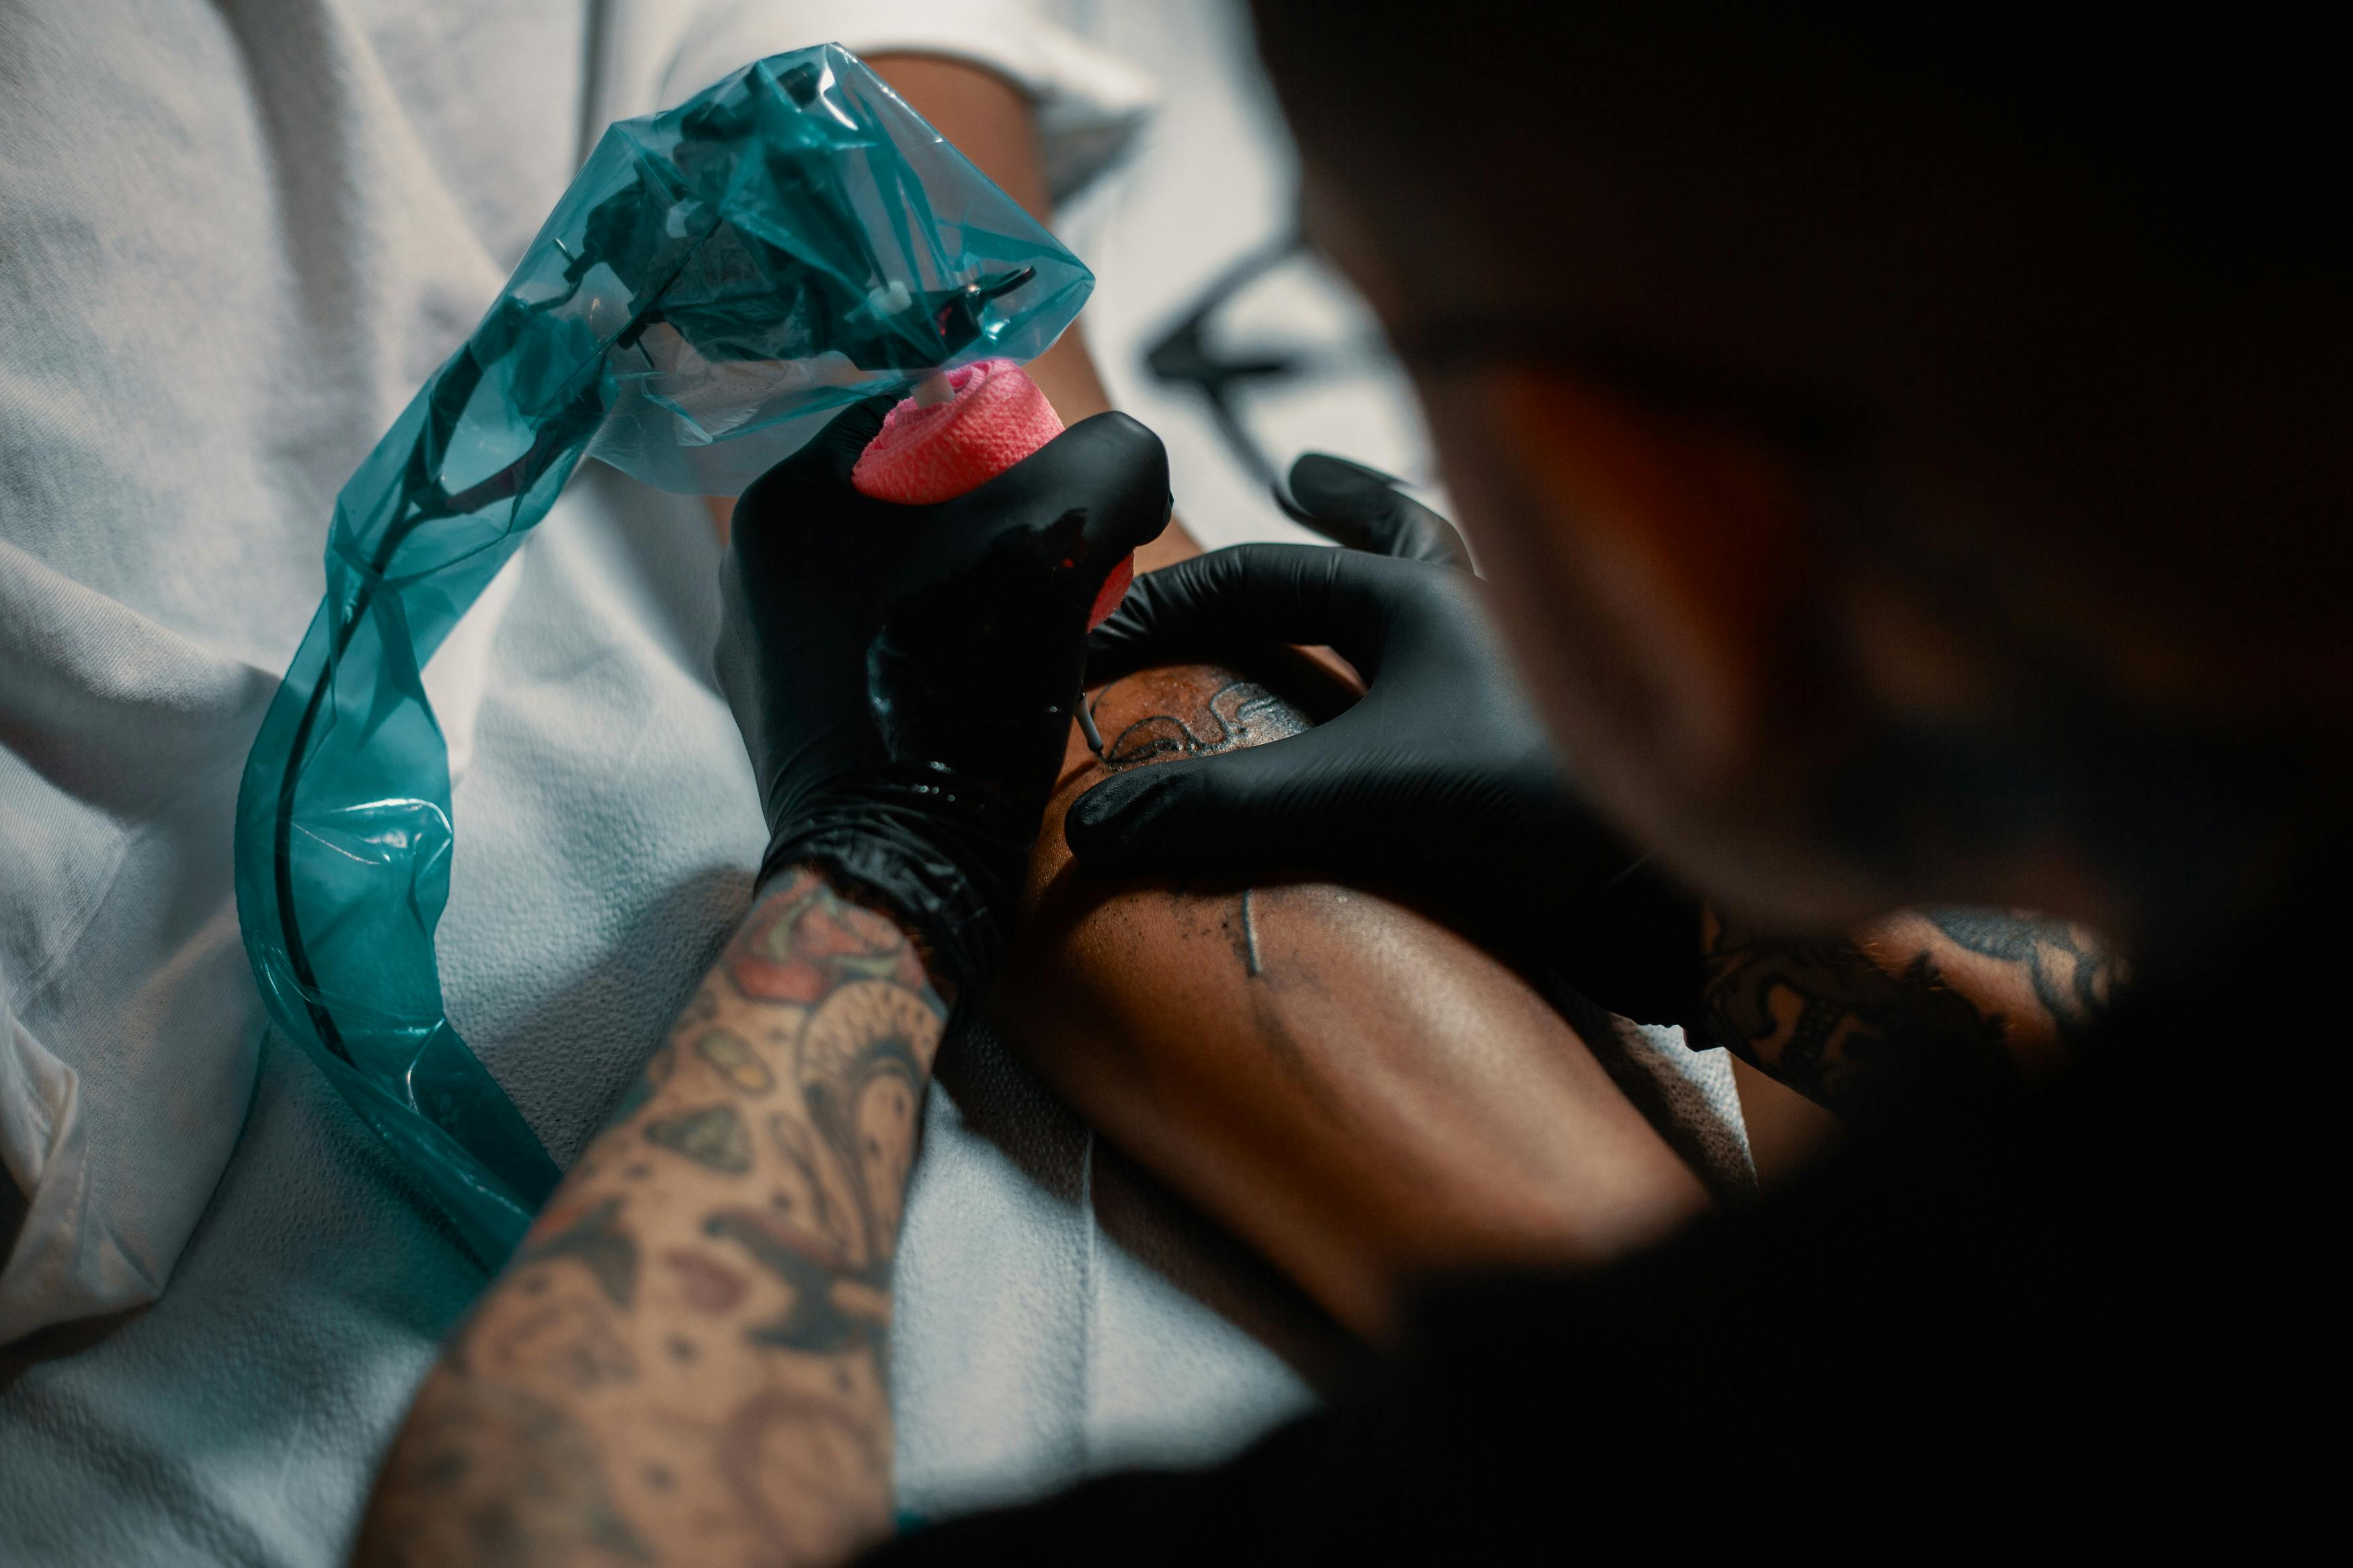 Smoking Weed Before a Tattoo: A tattoo artist with gloved hands operating a machine on a mans arm.